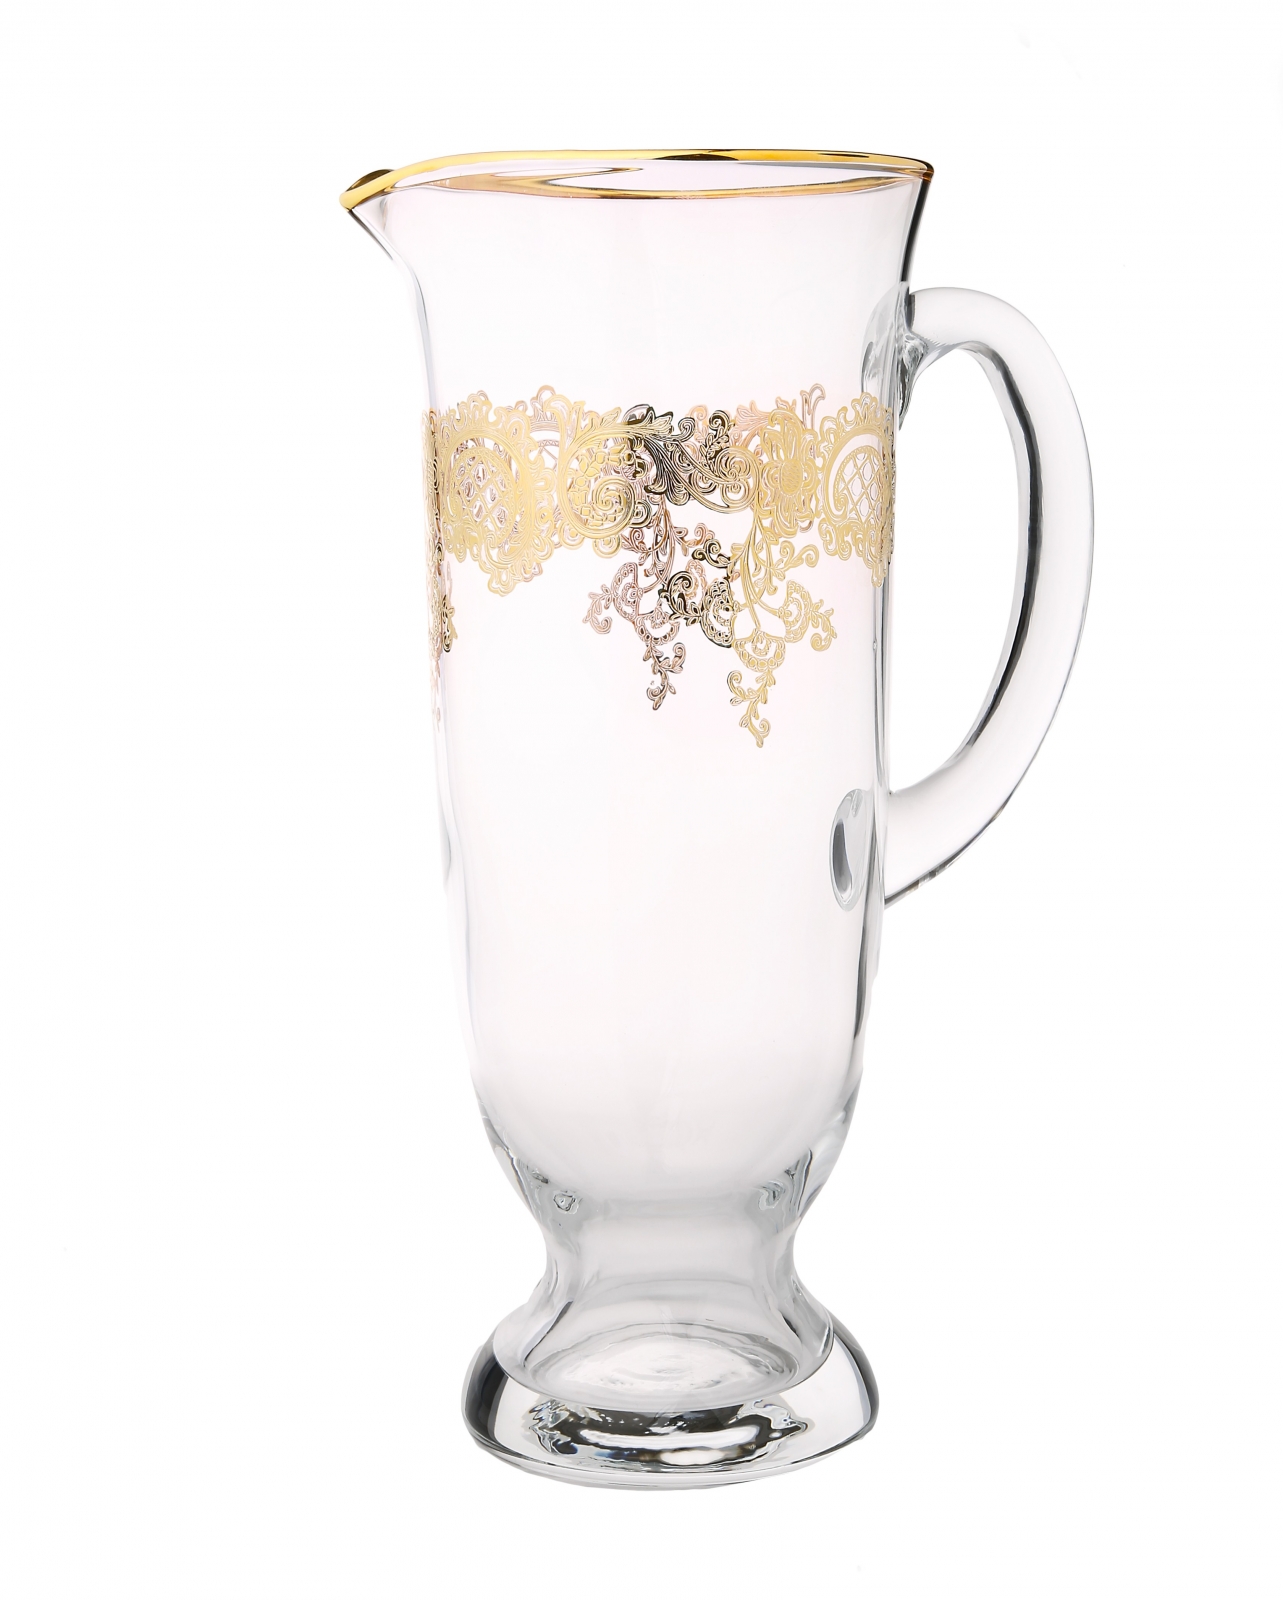 Water Pitcher with 24k Rich Gold Design